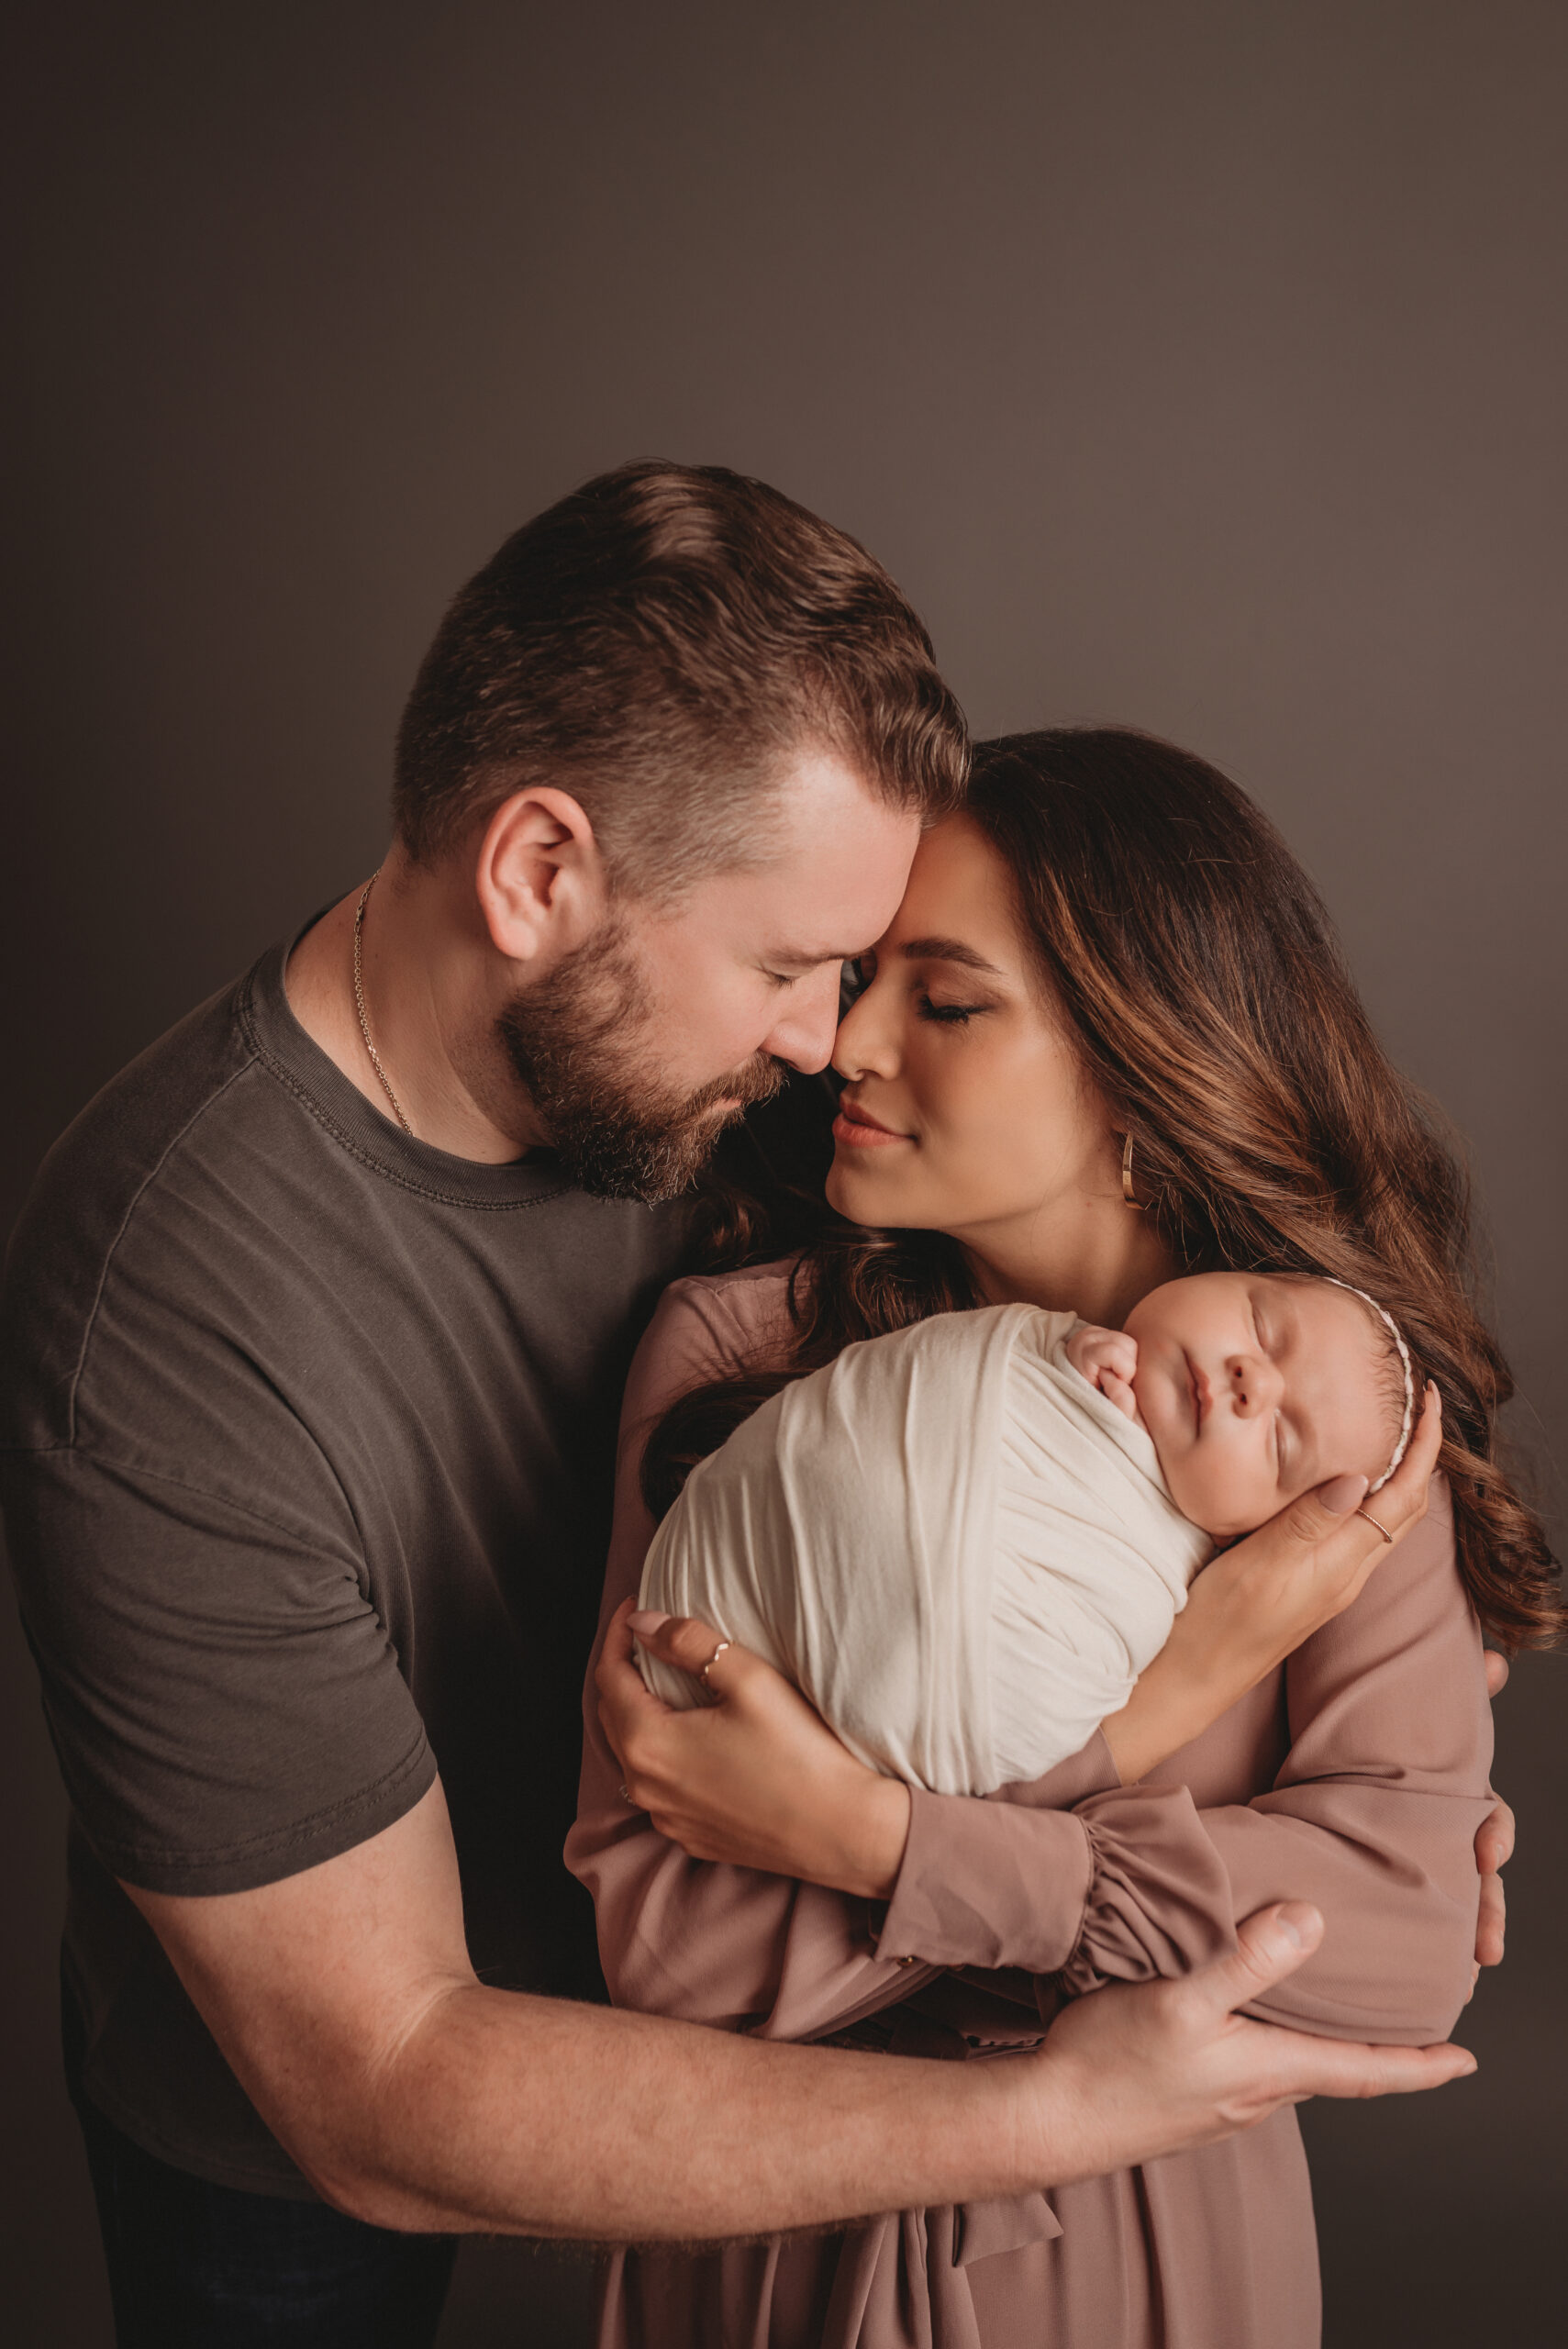 Don't Miss the Opportunity for Newborn Portraits